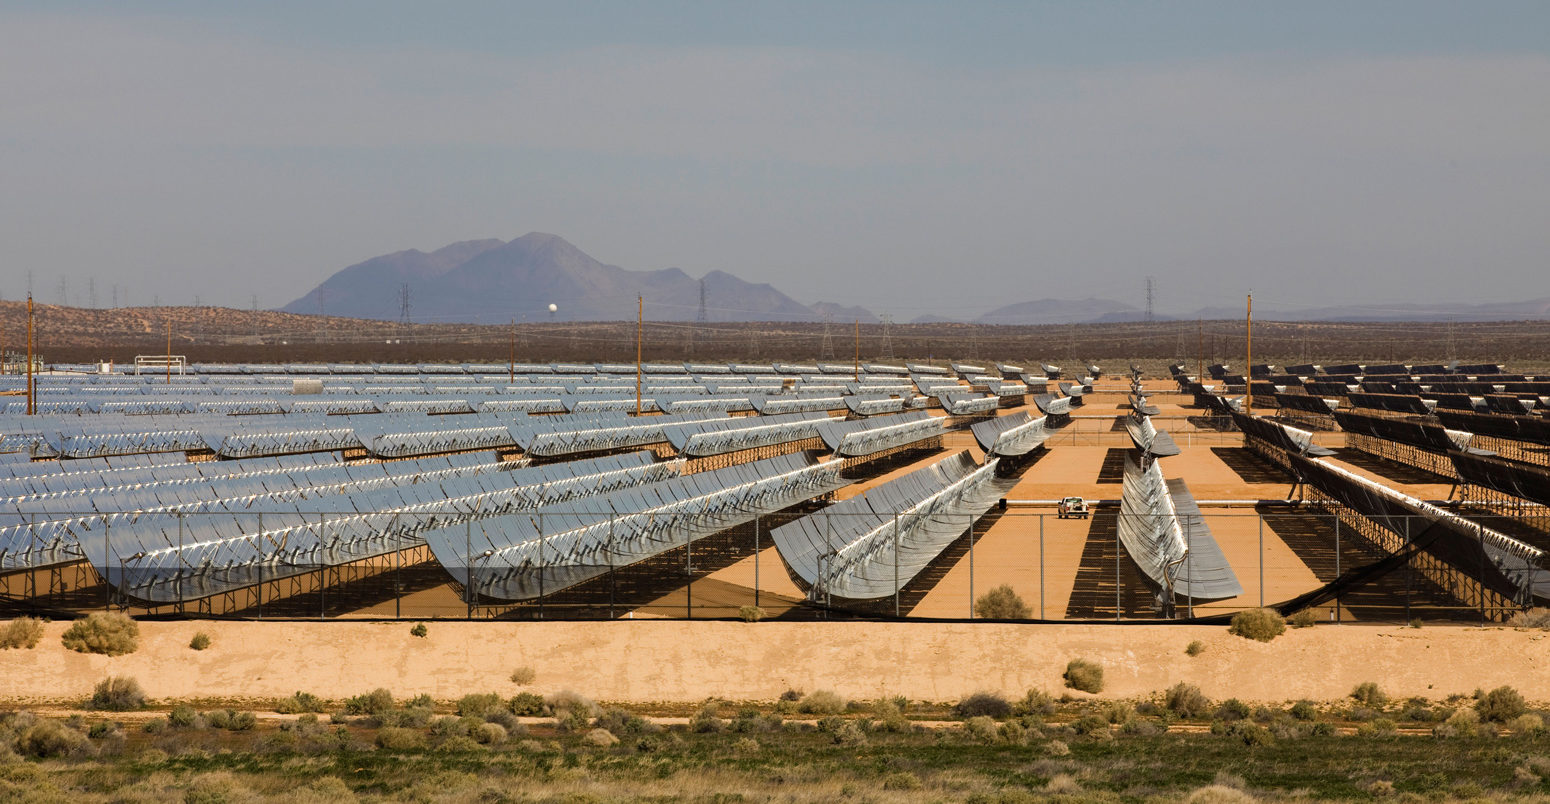 An array of solar troughs in the North American southwest desert - California, USA